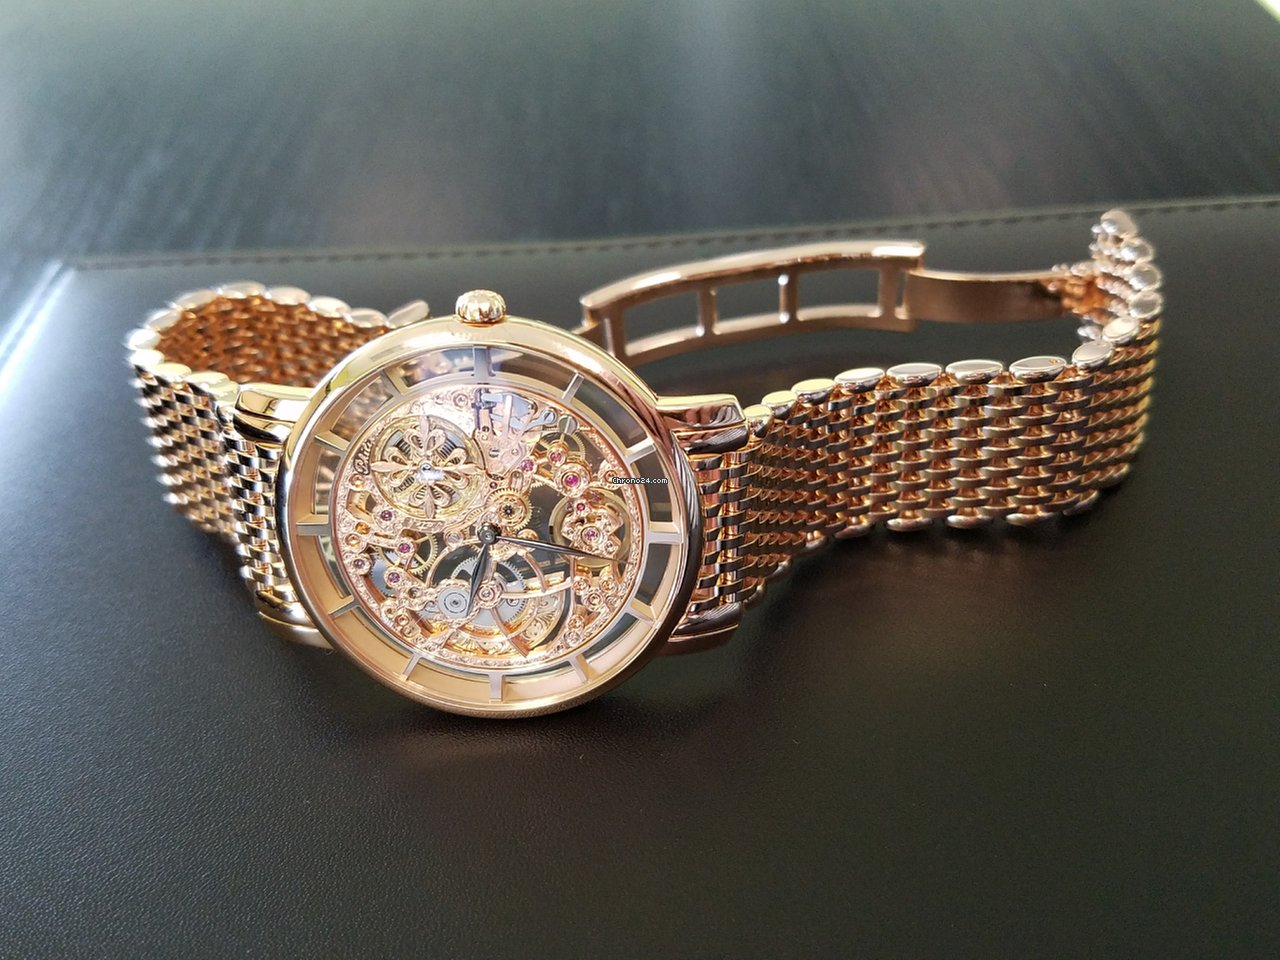 Patek Philippe Complications Skeletonized Ultra Thin 39mm Rose Gold Men's Watch with Bracelet